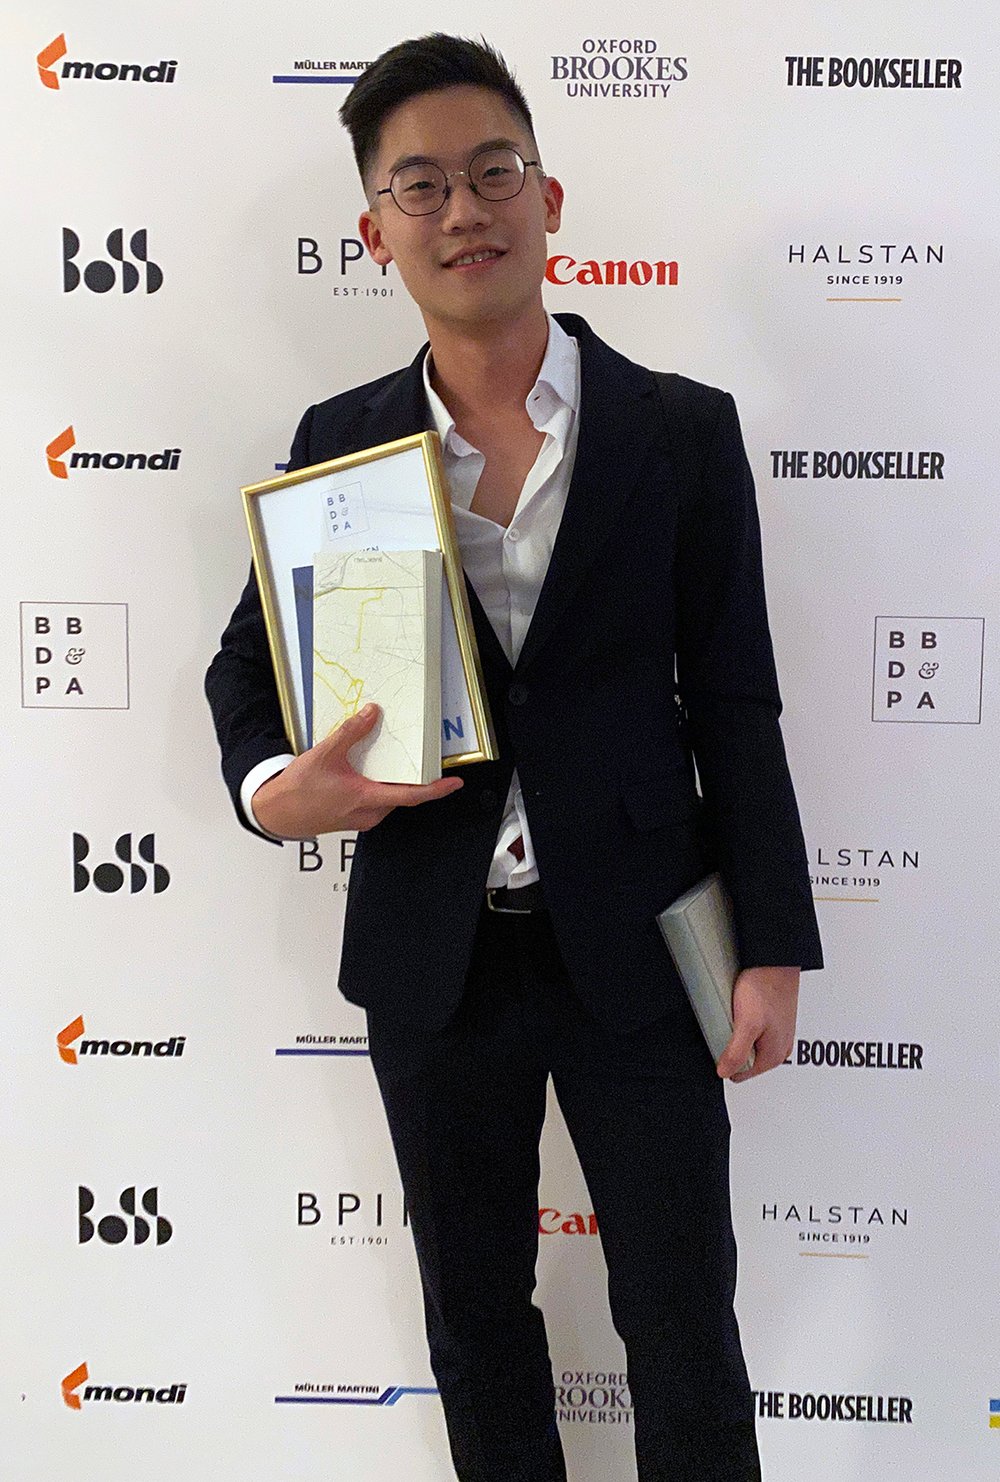 Wen with his book and certificate at the awards event.